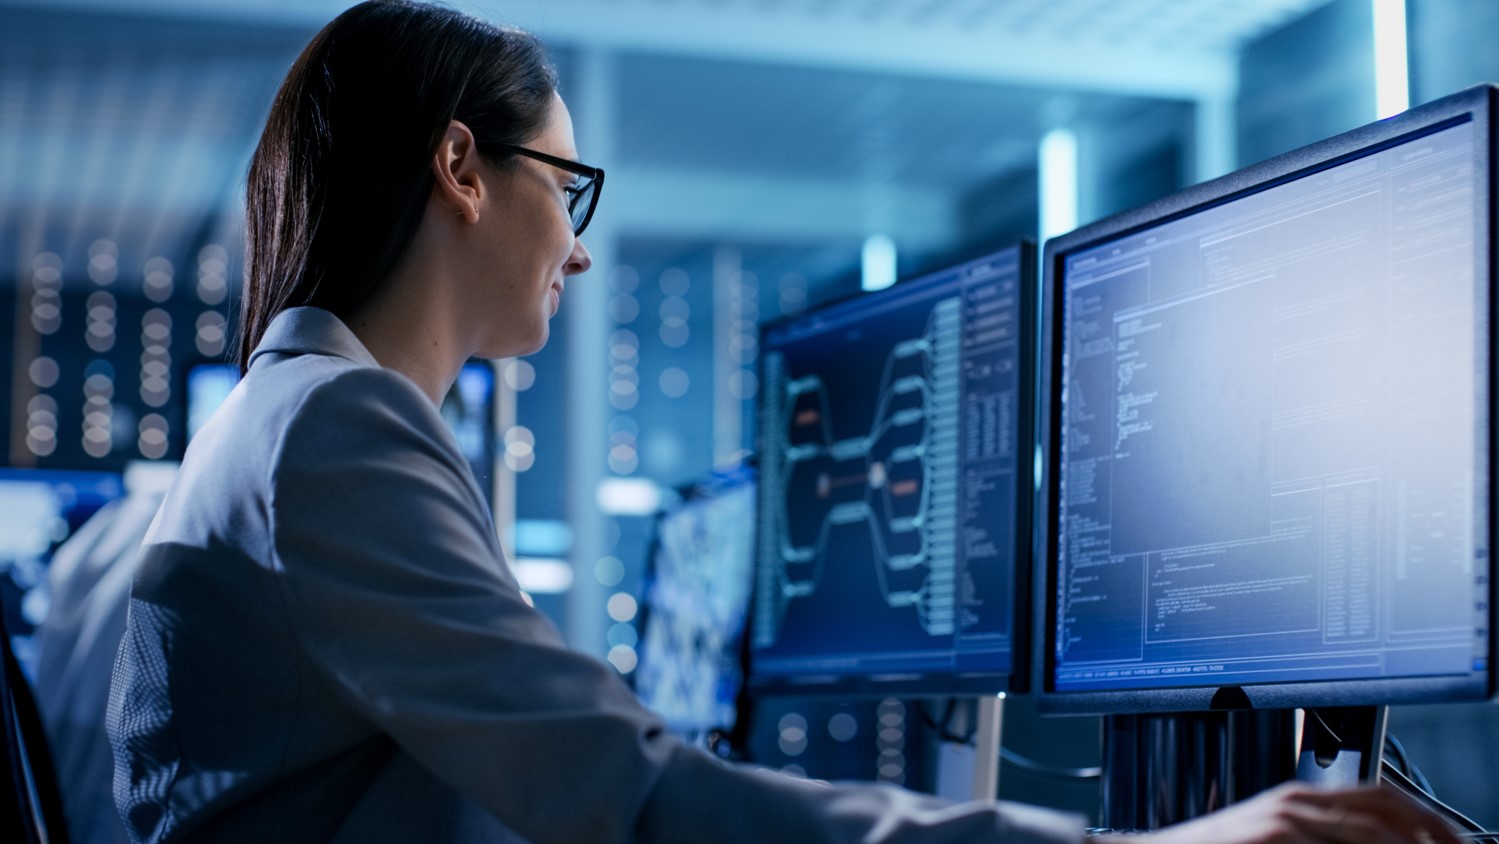 Azure Security Assessment, Azure Security Health Check Image: woman working in cybersecurity and cloud security looks at results on her screen